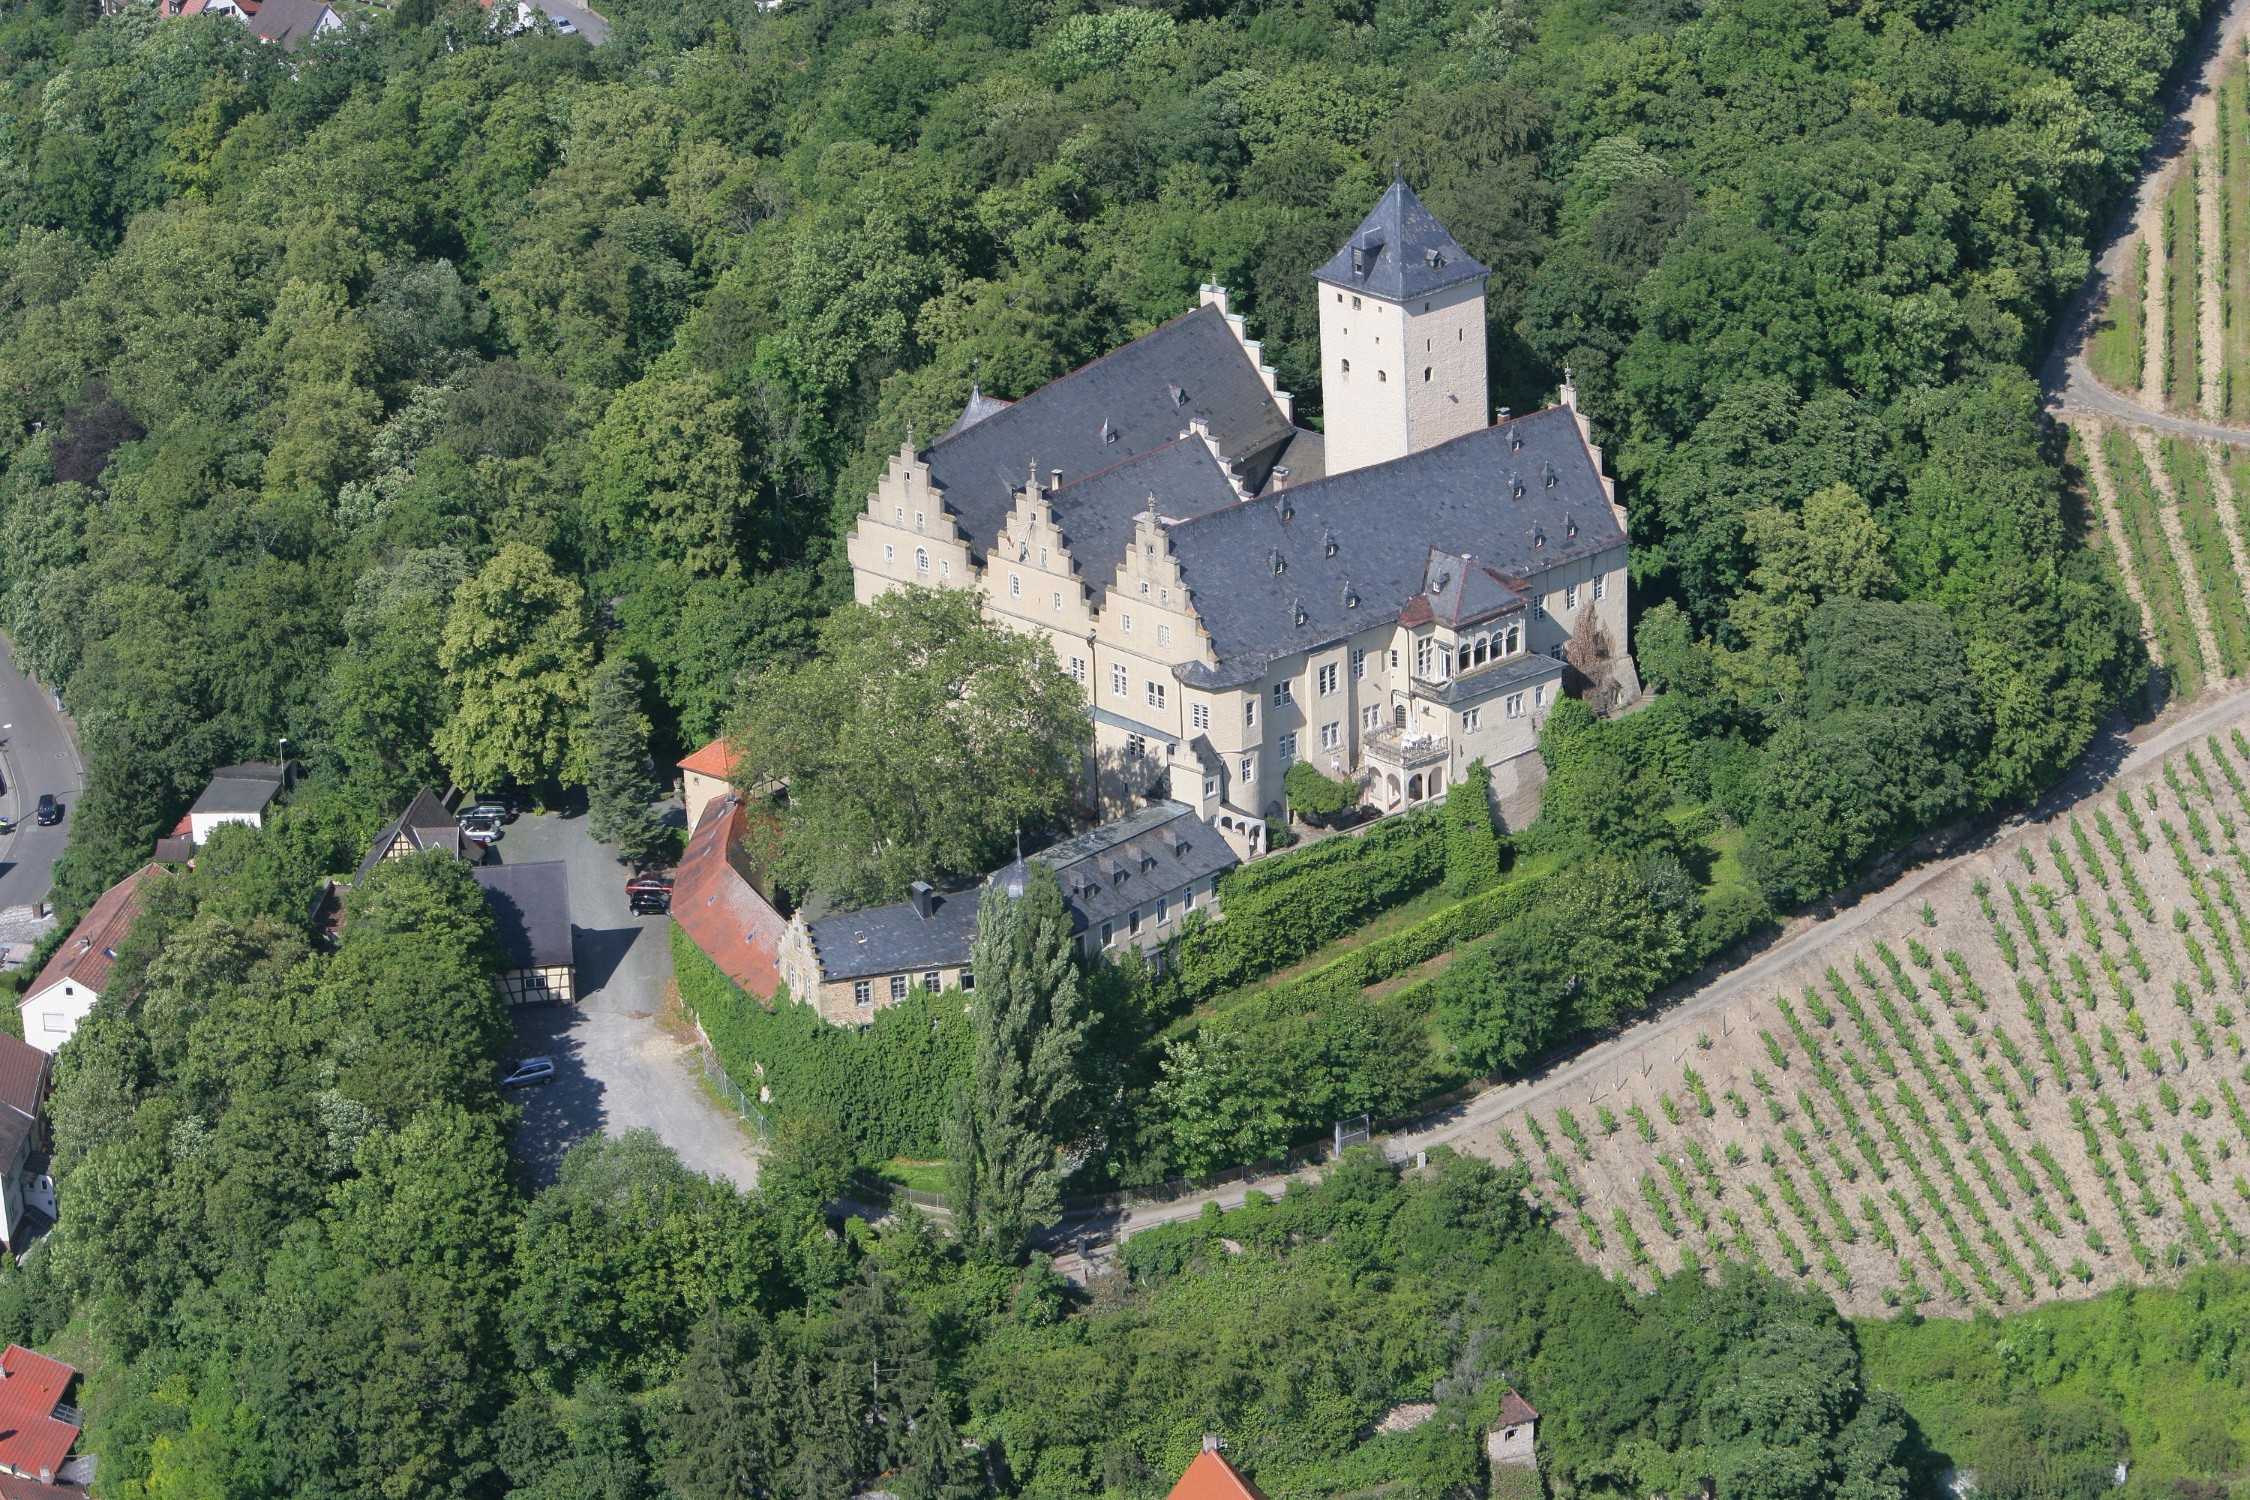 Mainberg Castle in Lower Franconia on the Main